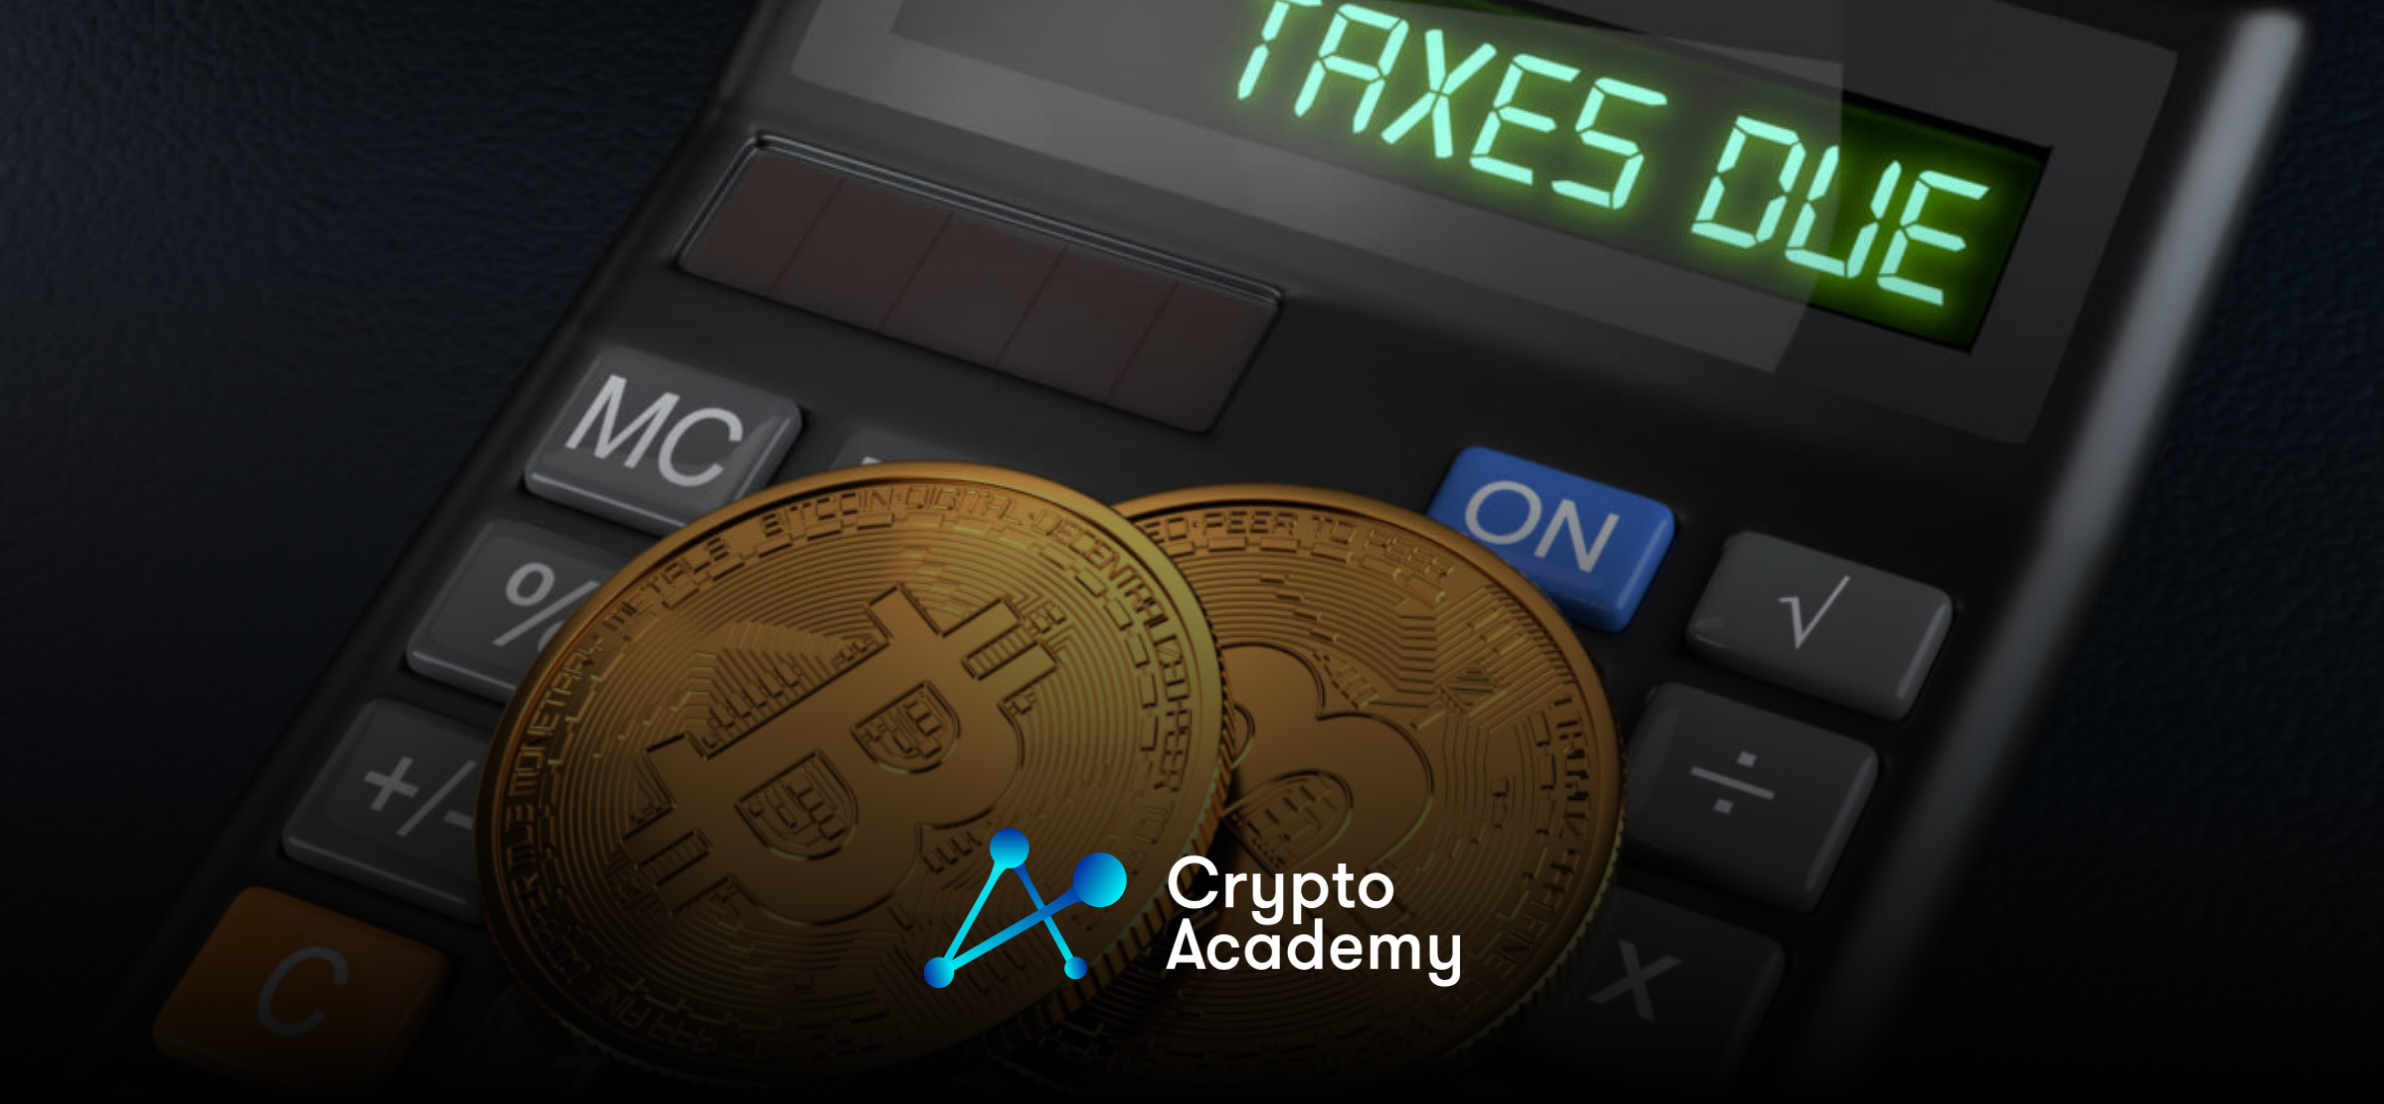 Self-Custody Will Normalize Crypto Tax Payments